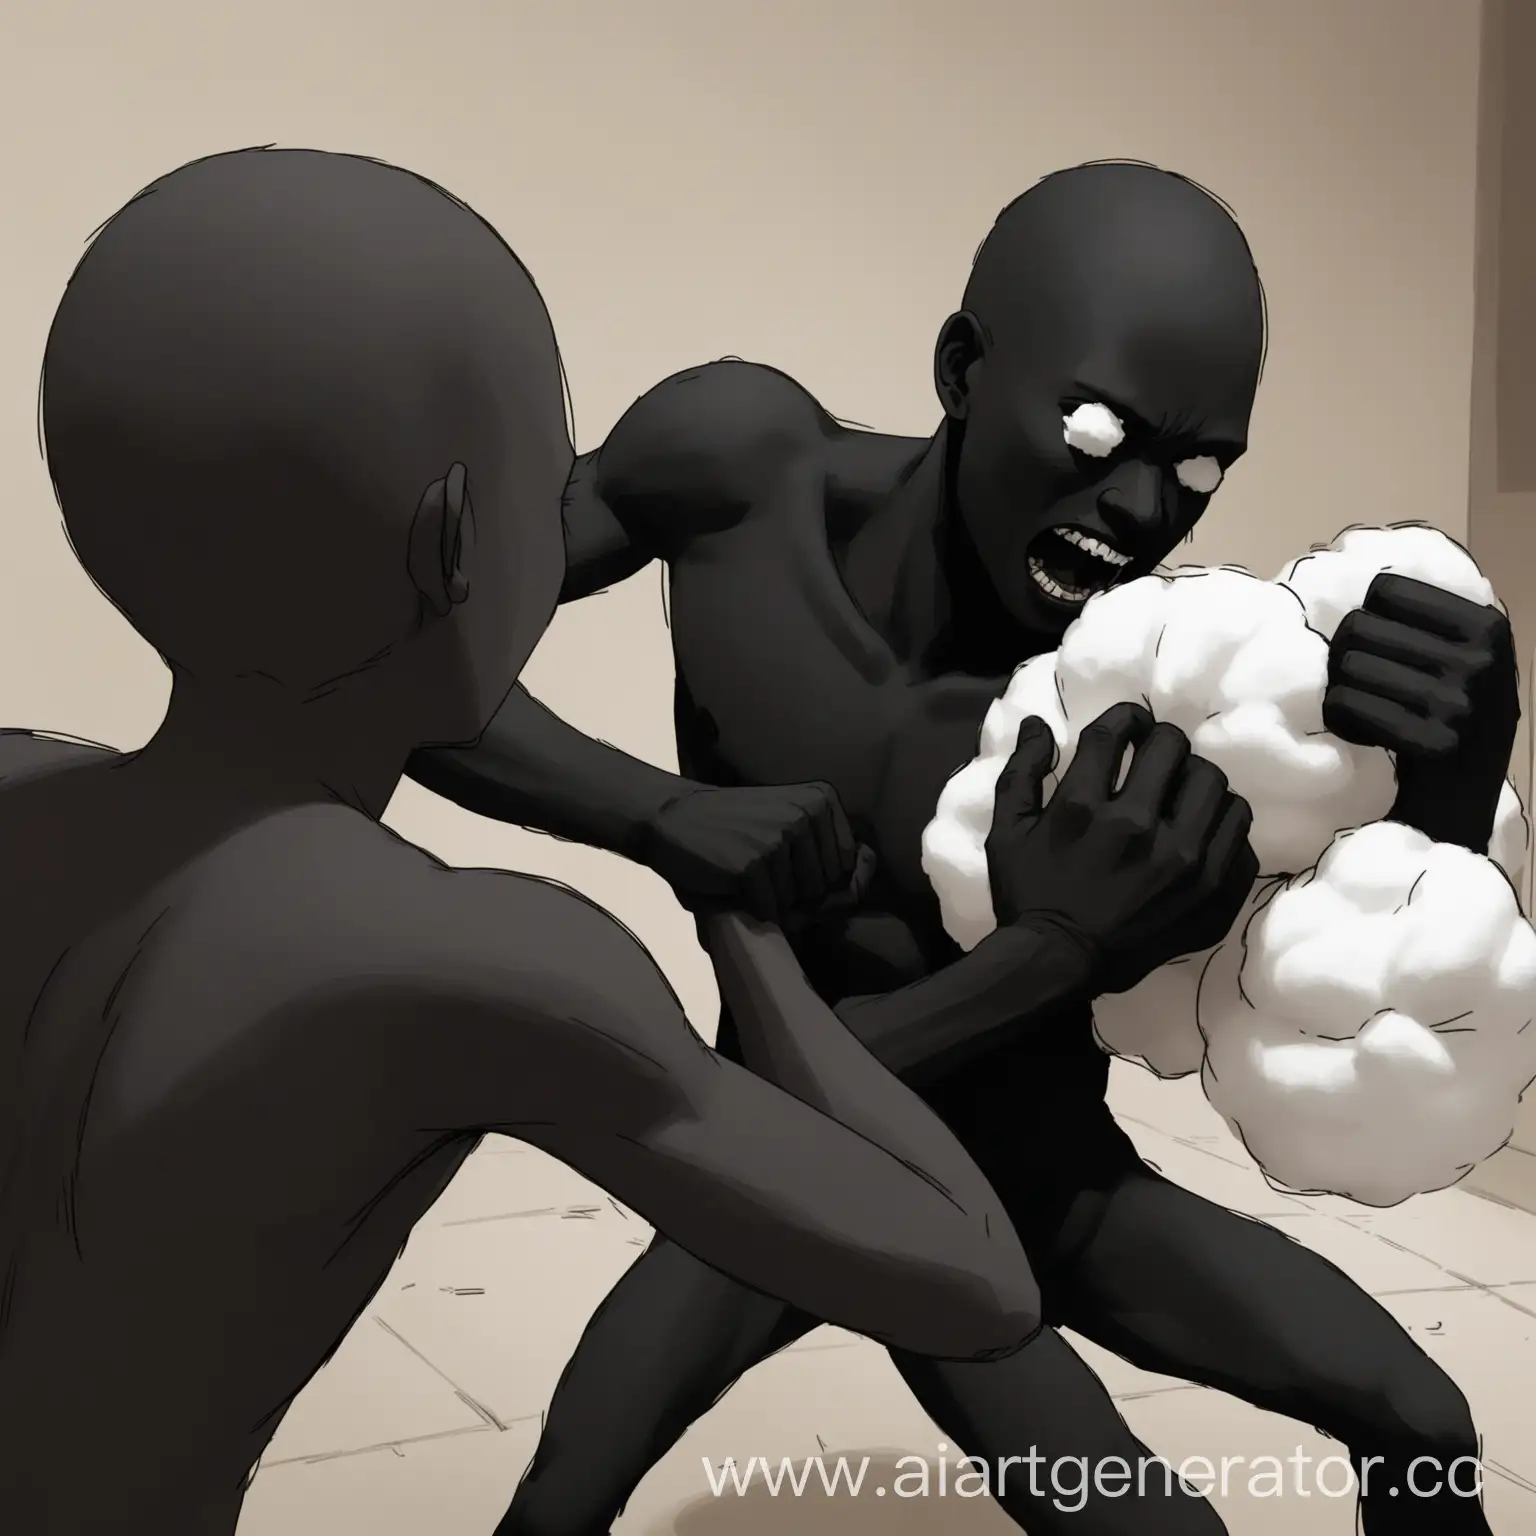 Intense-Struggle-Confrontation-between-Black-Skinned-Warrior-and-Cotton-Construct